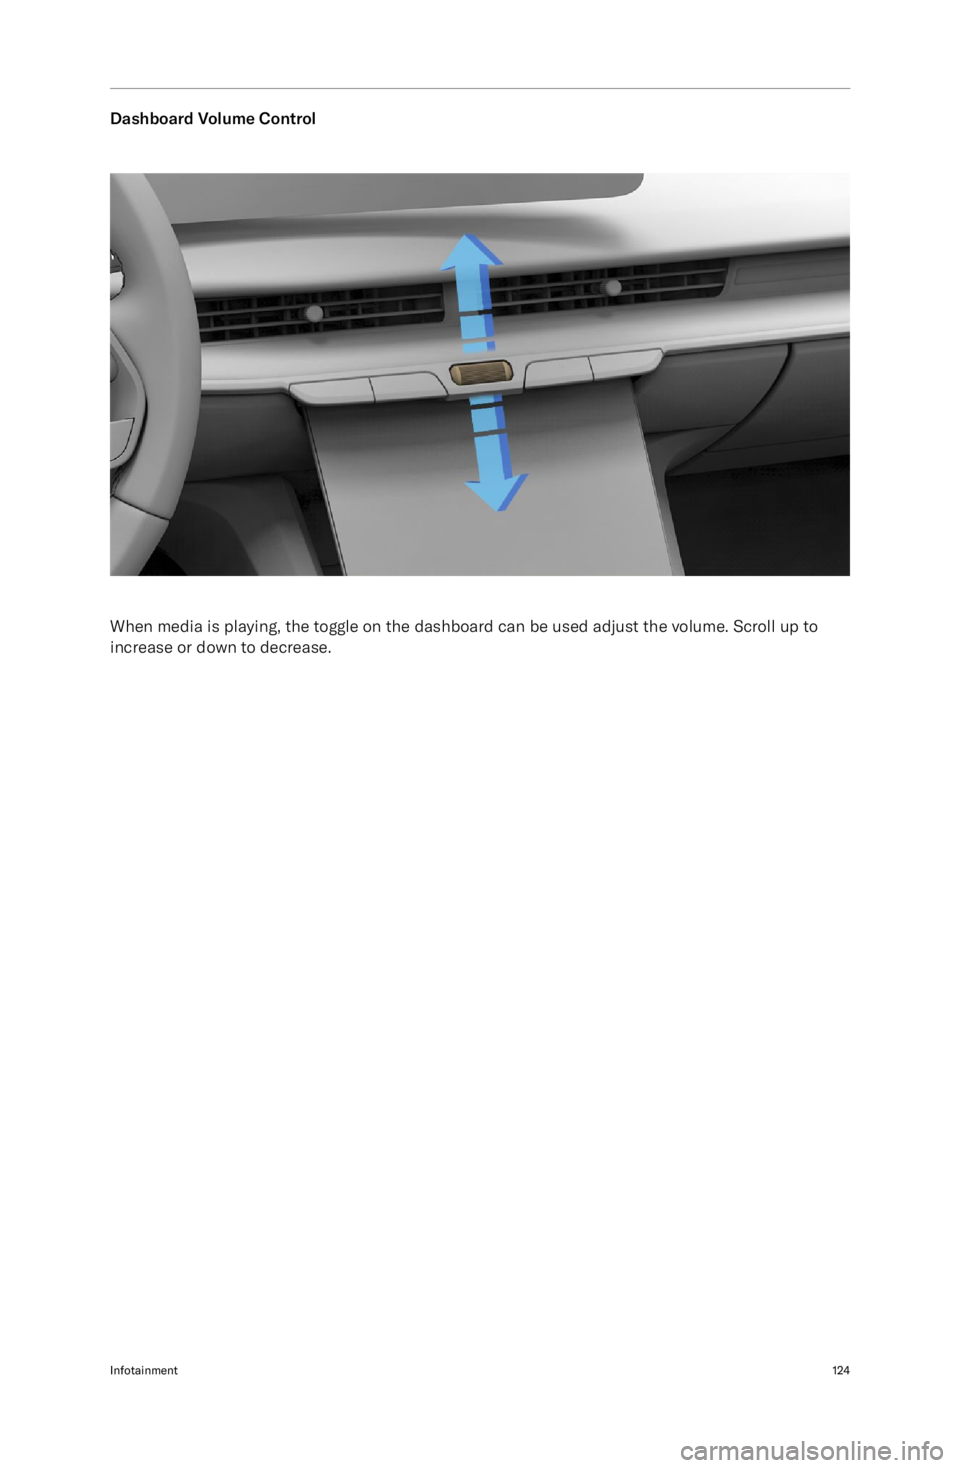 LUCID AIR 2023  Owners Manual Dashboard Volume Control
When media is playing, the toggle on the dashboard can be used adjust the volume. Scroll up to
increase or down to decrease.
Infotainment124 